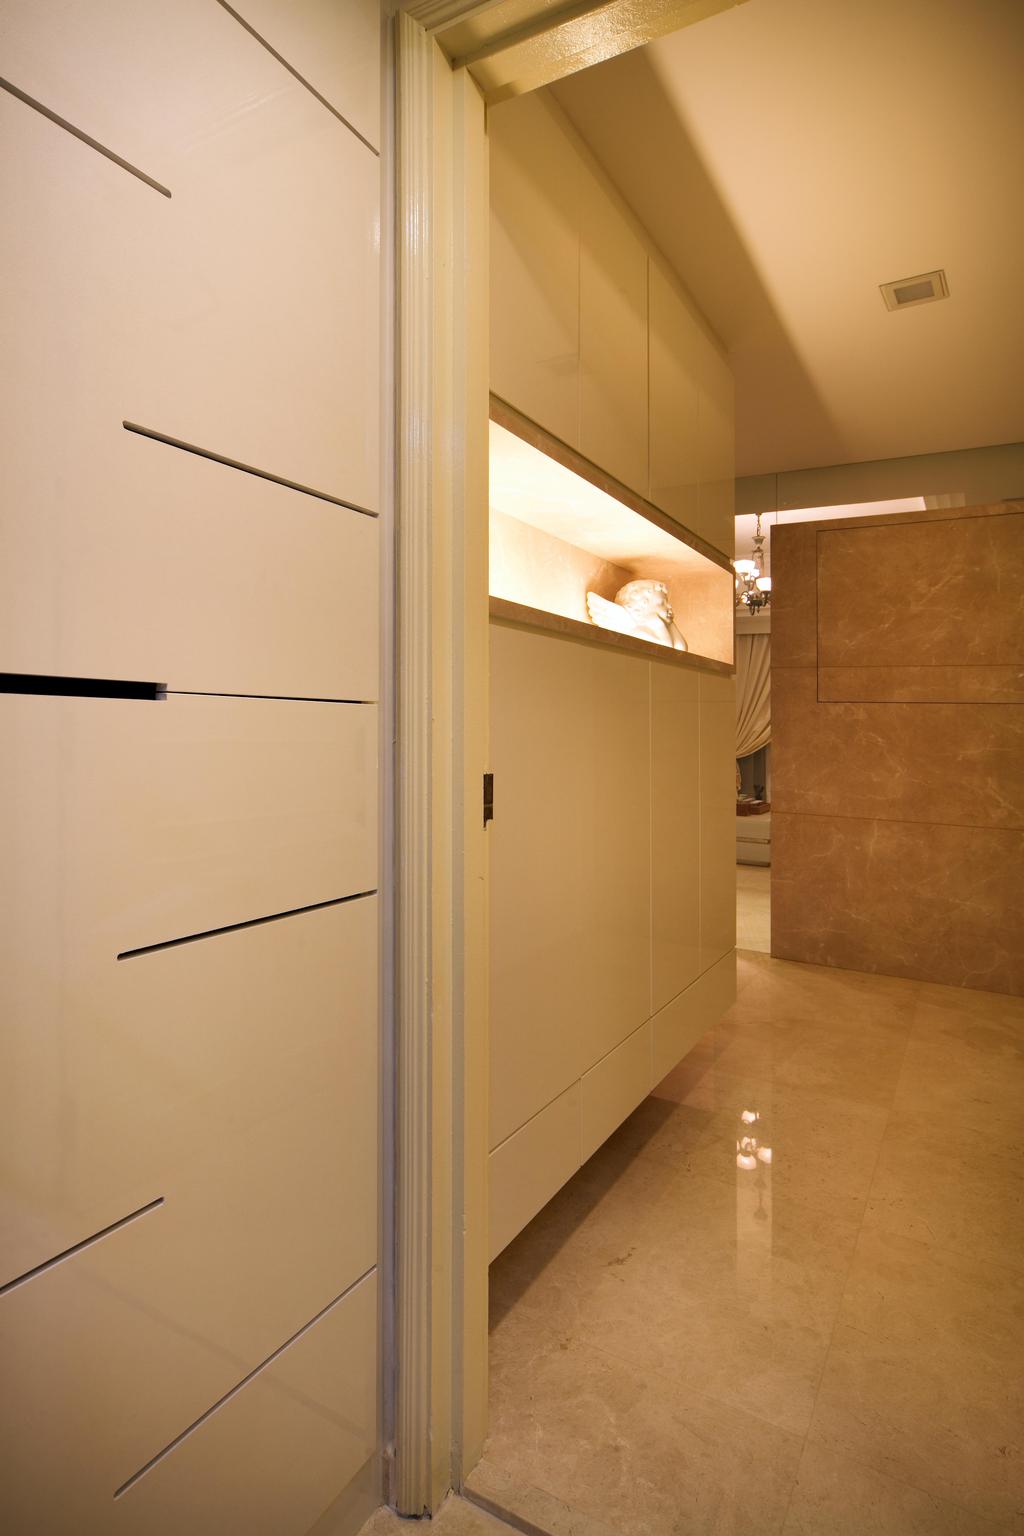 Transitional, Condo, Mergui Road (Block 81), Interior Designer, Boonsiew D'sign, Beige, Neutral Tones, Indented Shelf, Recessed Shelf, White Marble Floor, Sculpture, Marble Wall, White, White Kitchen Cabinets, Storage